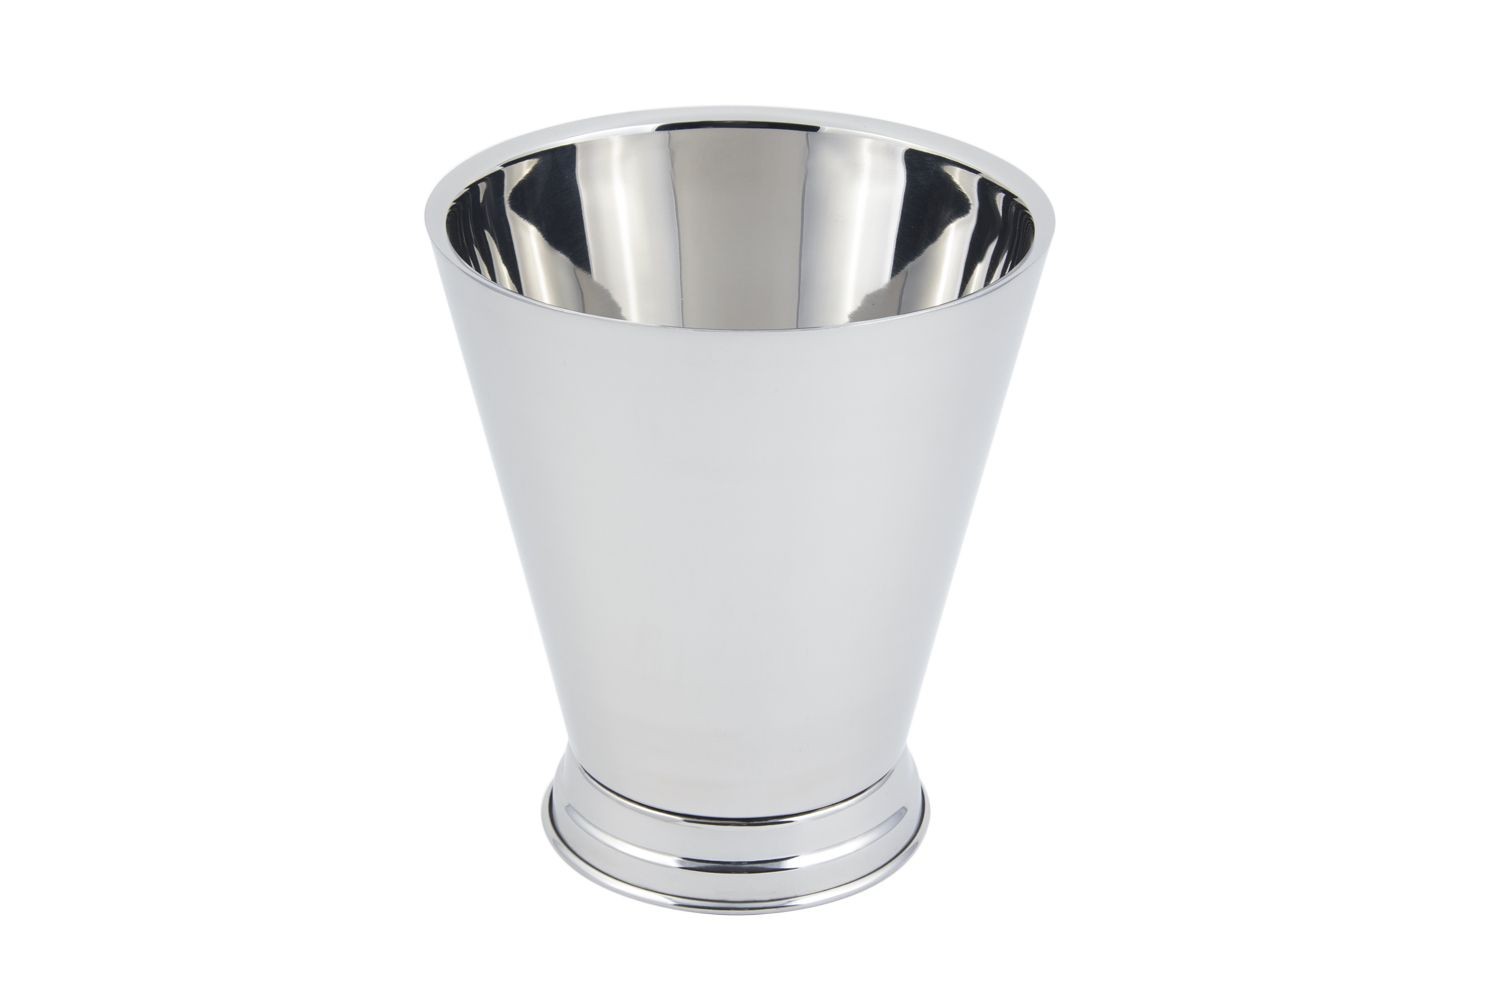 Bon Chef 61300 Stainless Steel Champagne Bucket, 4 Qt. 24 oz.